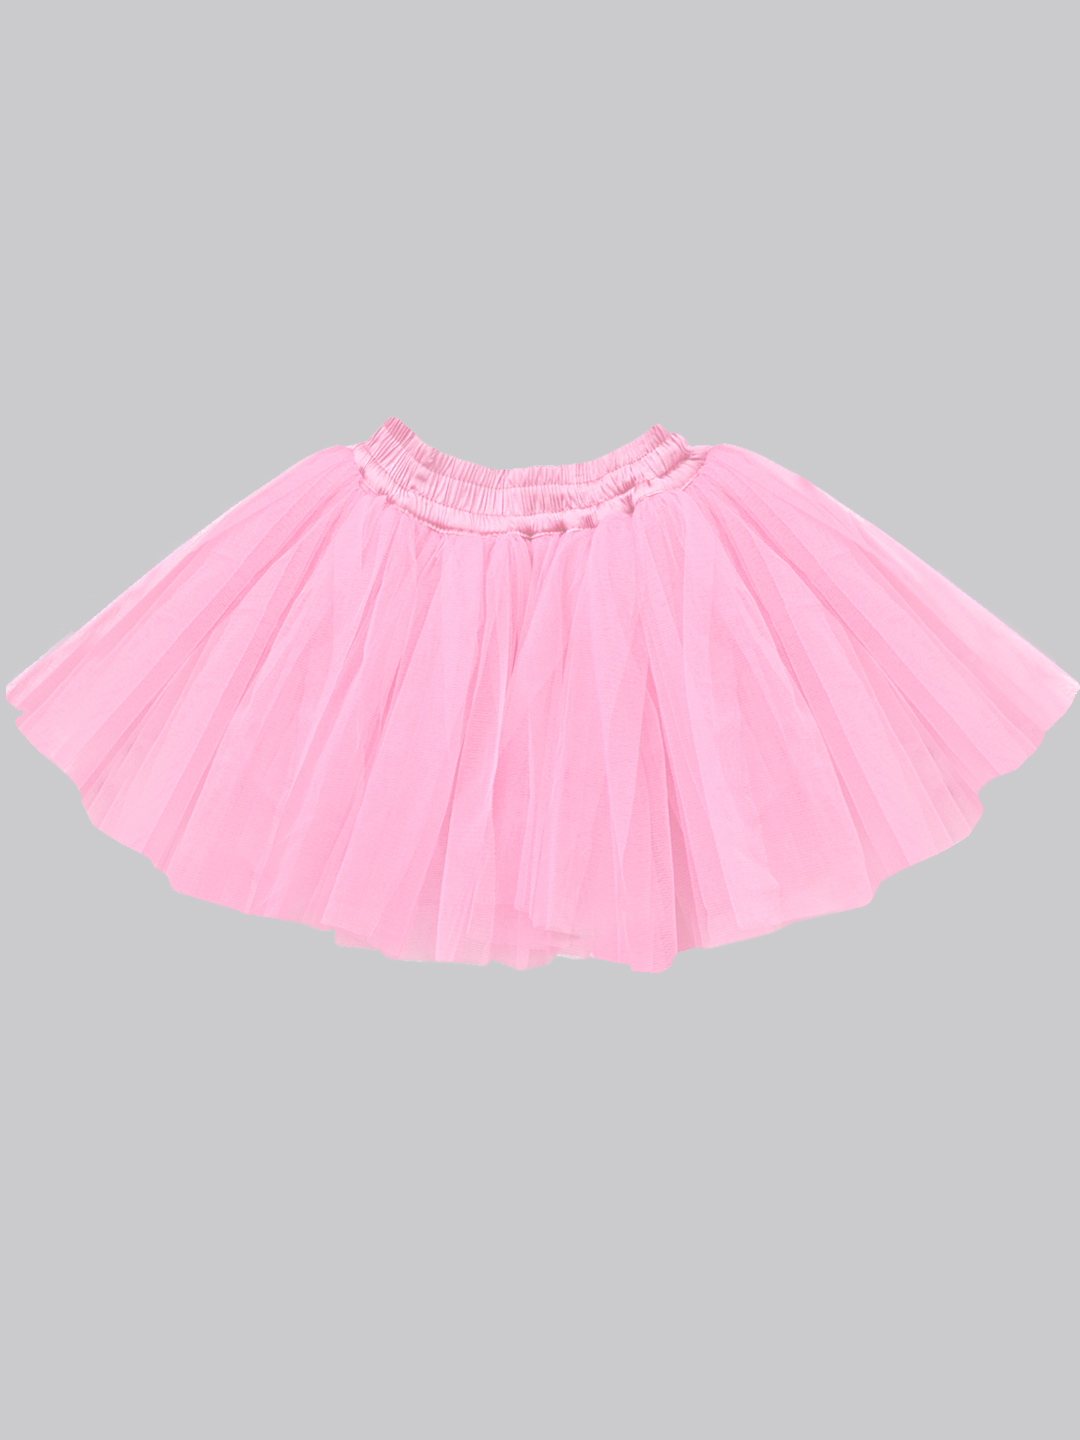 Baby Pink Tulle Skirt - A.T.U.N.